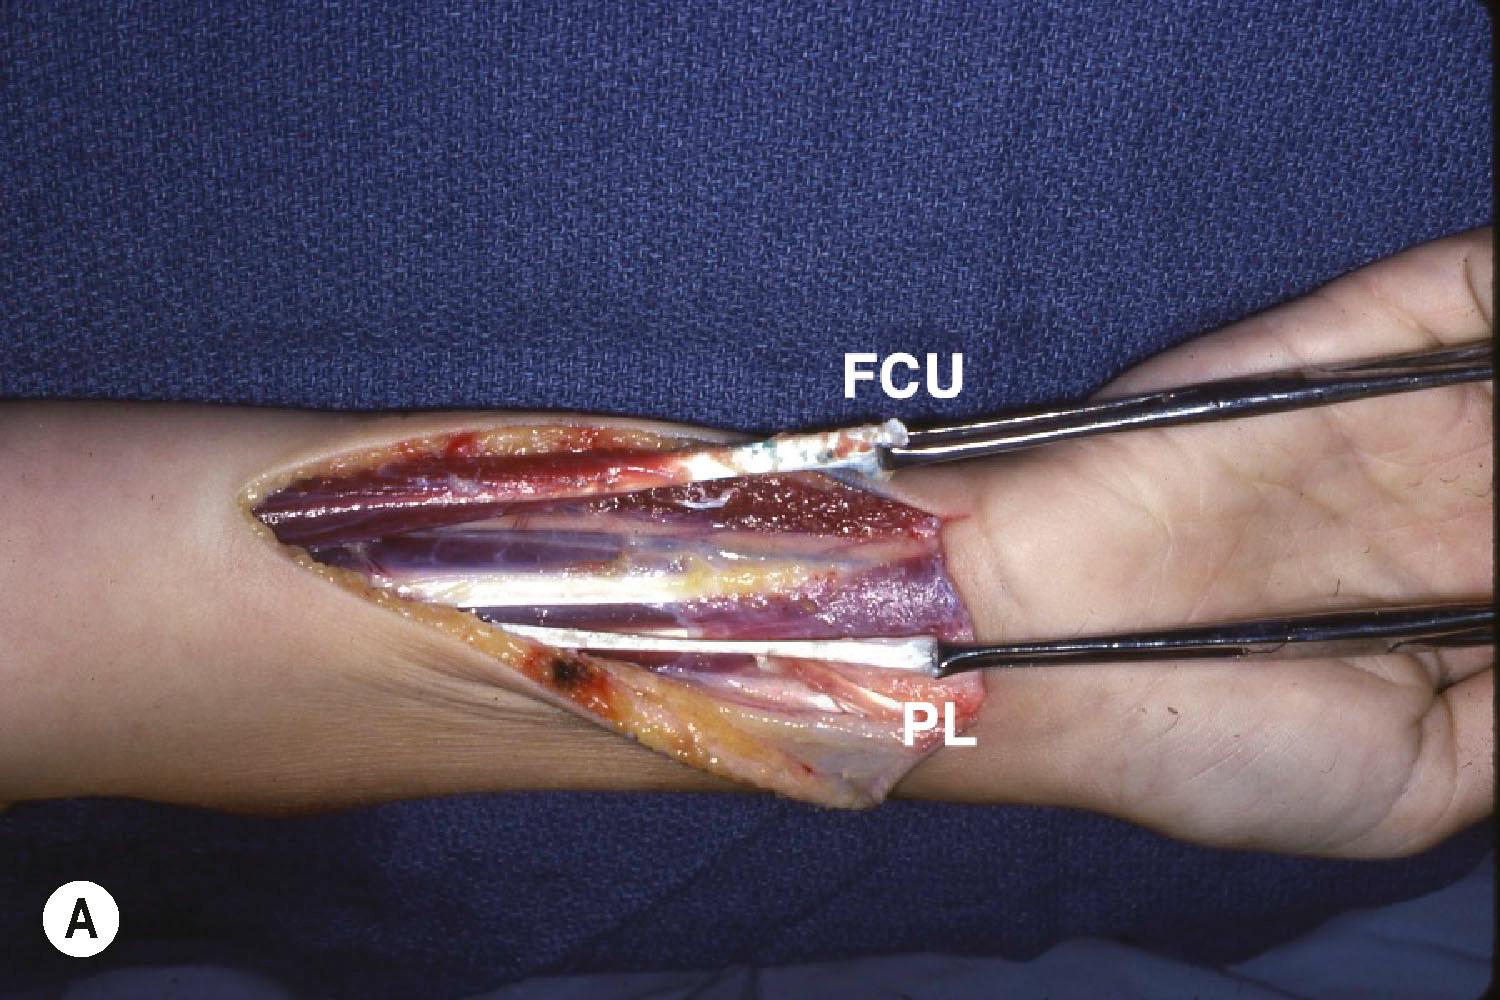 Figure 25.6, (A) Through a volar incision in the distal third of the forearm, the flexor carpi ulnaris (FCU) tendon and its distal muscle and the palmaris longus (PL) tendon are isolated. (B) The pronator teres (PT) tendon is passed around the radial border of the forearm and sutured to extensor carpi radialis brevis (ECRB). The FCU tendon is passed around the ulnar border of the distal forearm and sutured to the extensor digitorum communis (EDC) tendons.